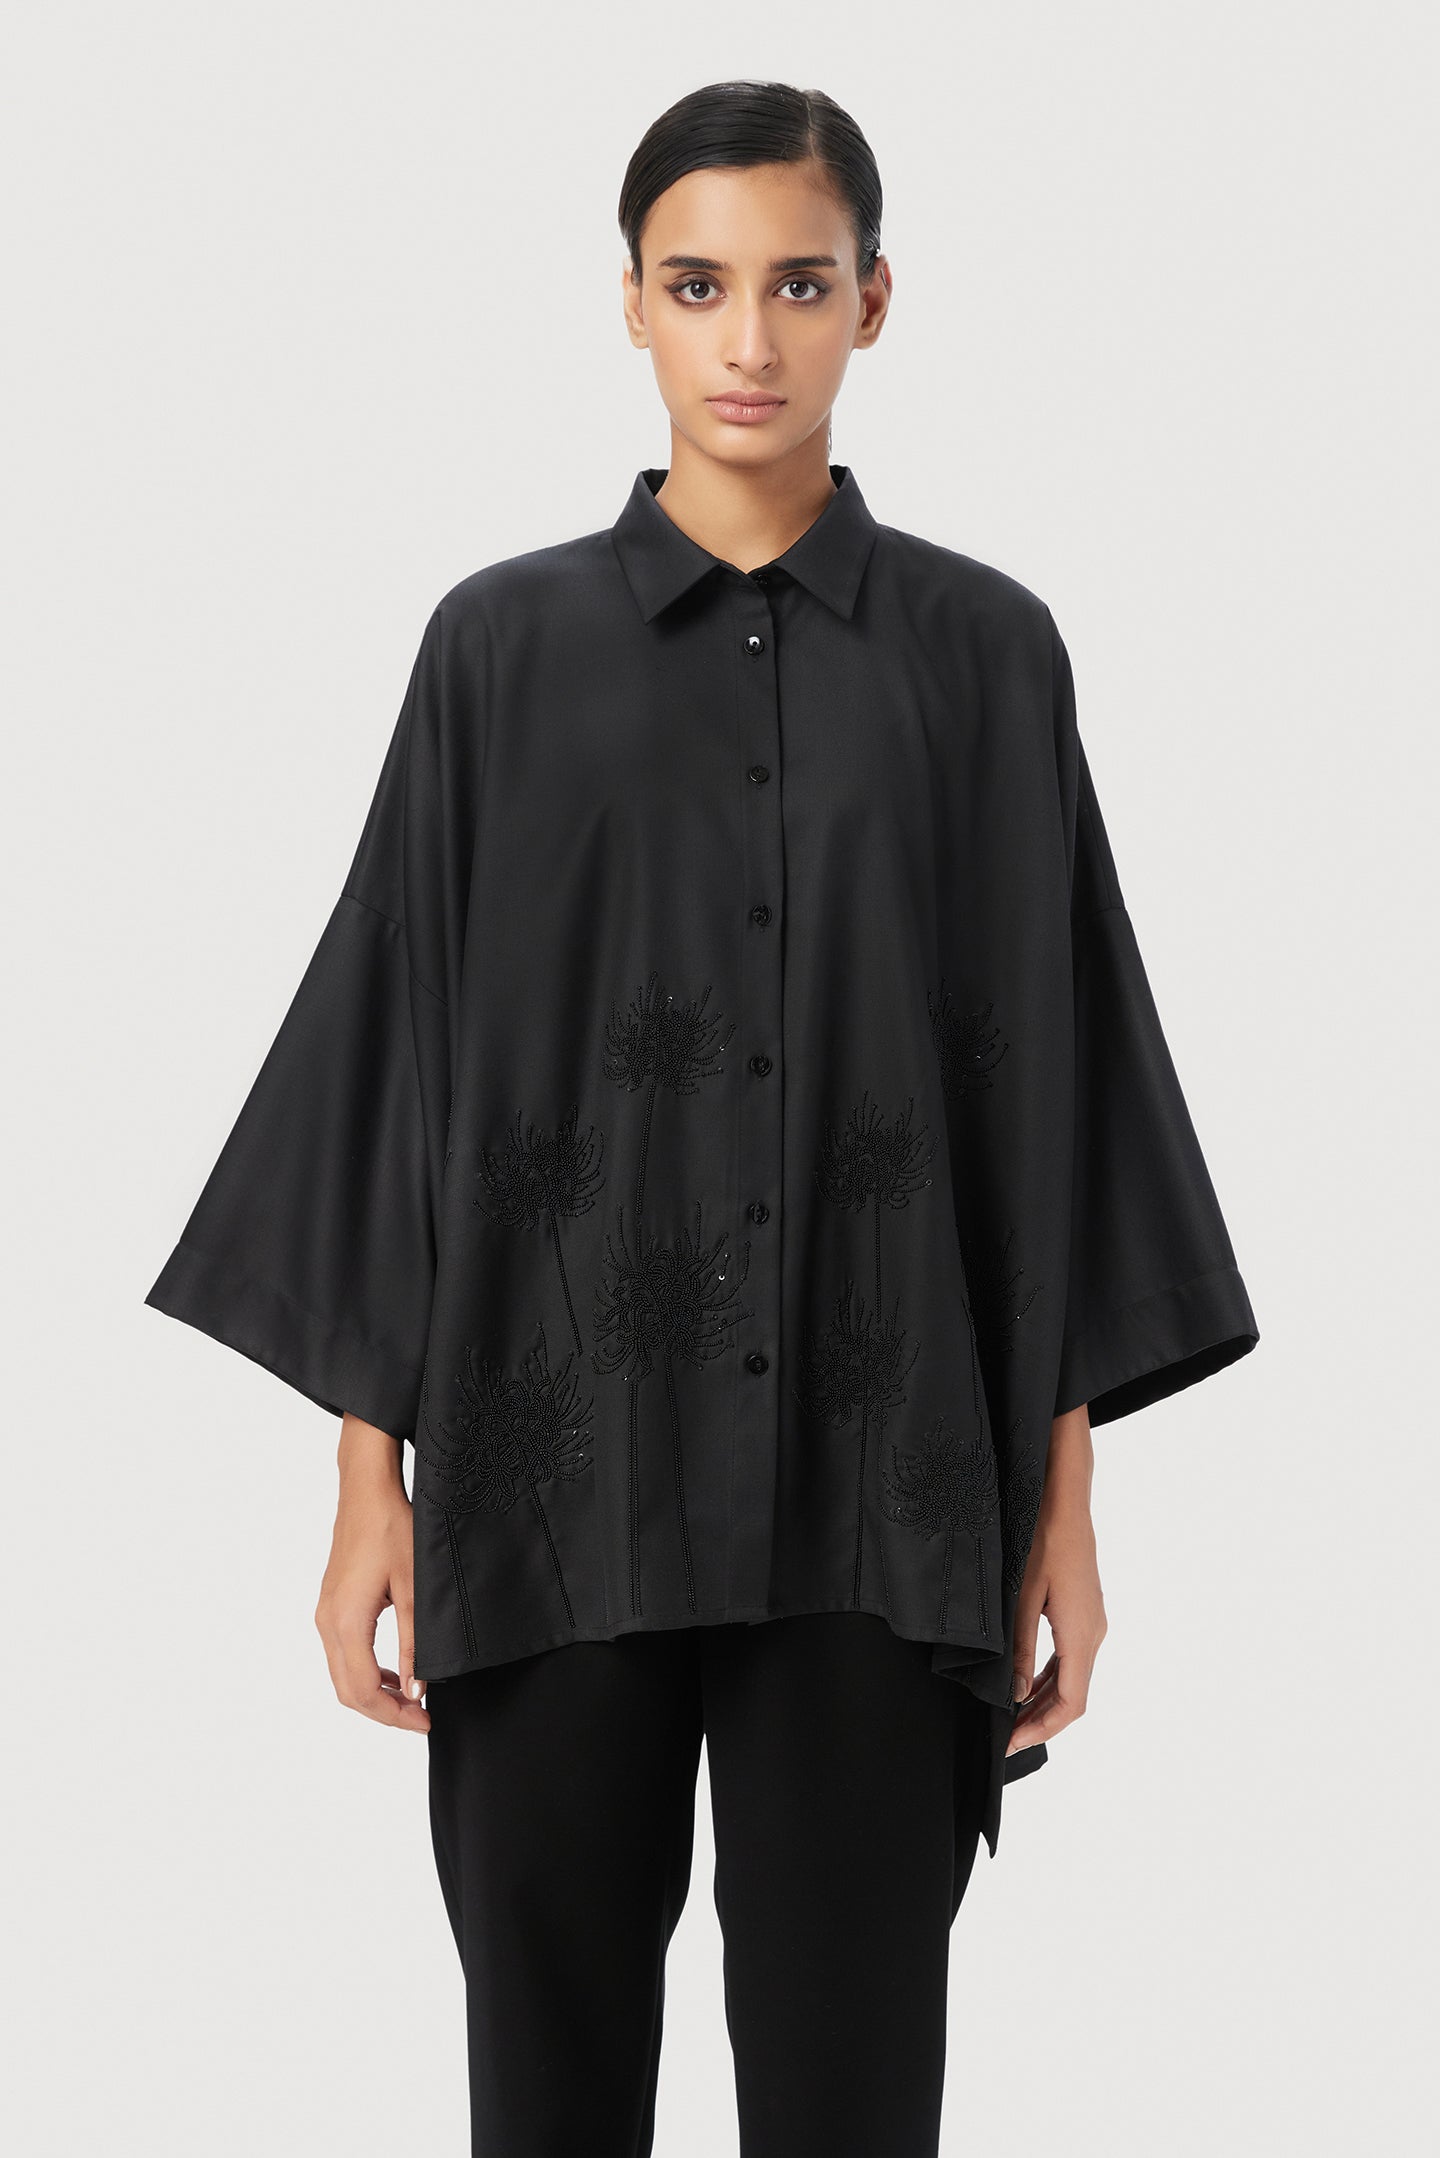 Oversized Button-Down Shirt with Chrysanthemum Beads